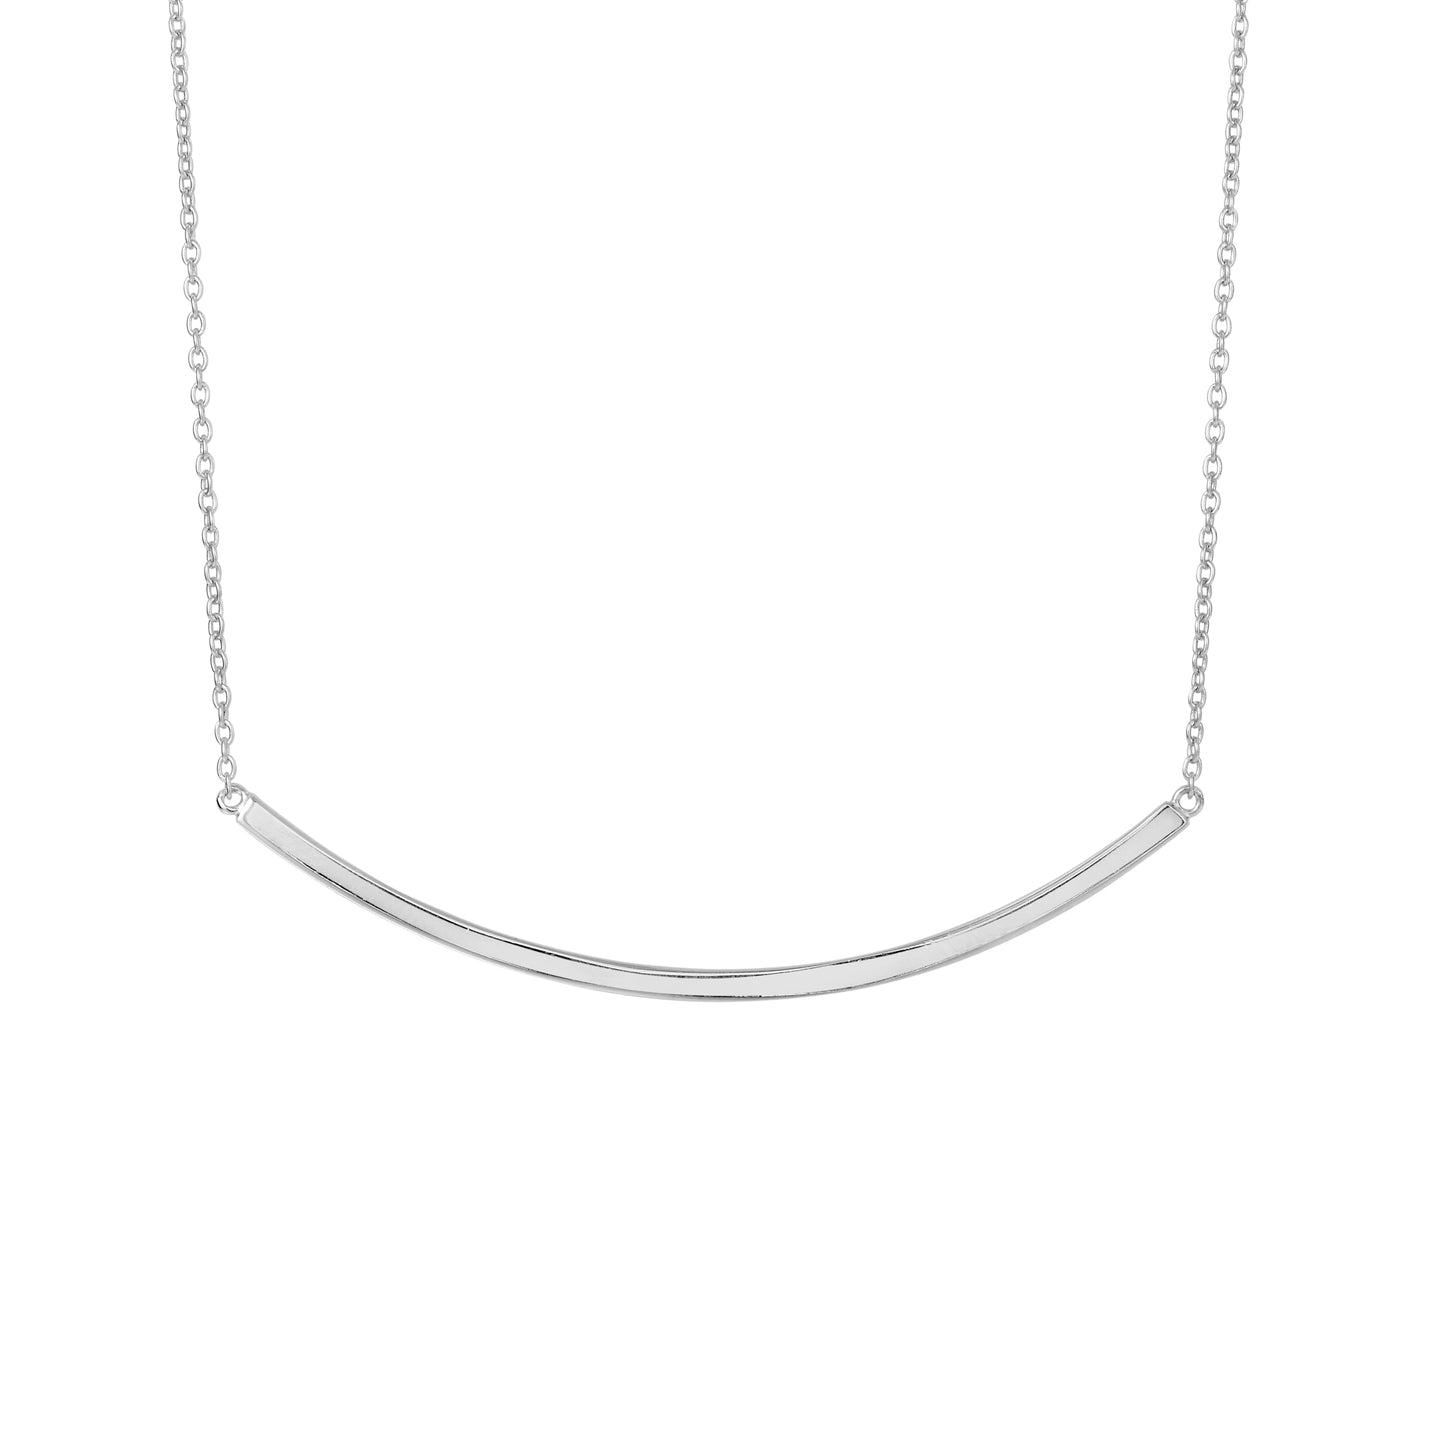 Silver Curved Thin Bar Necklace